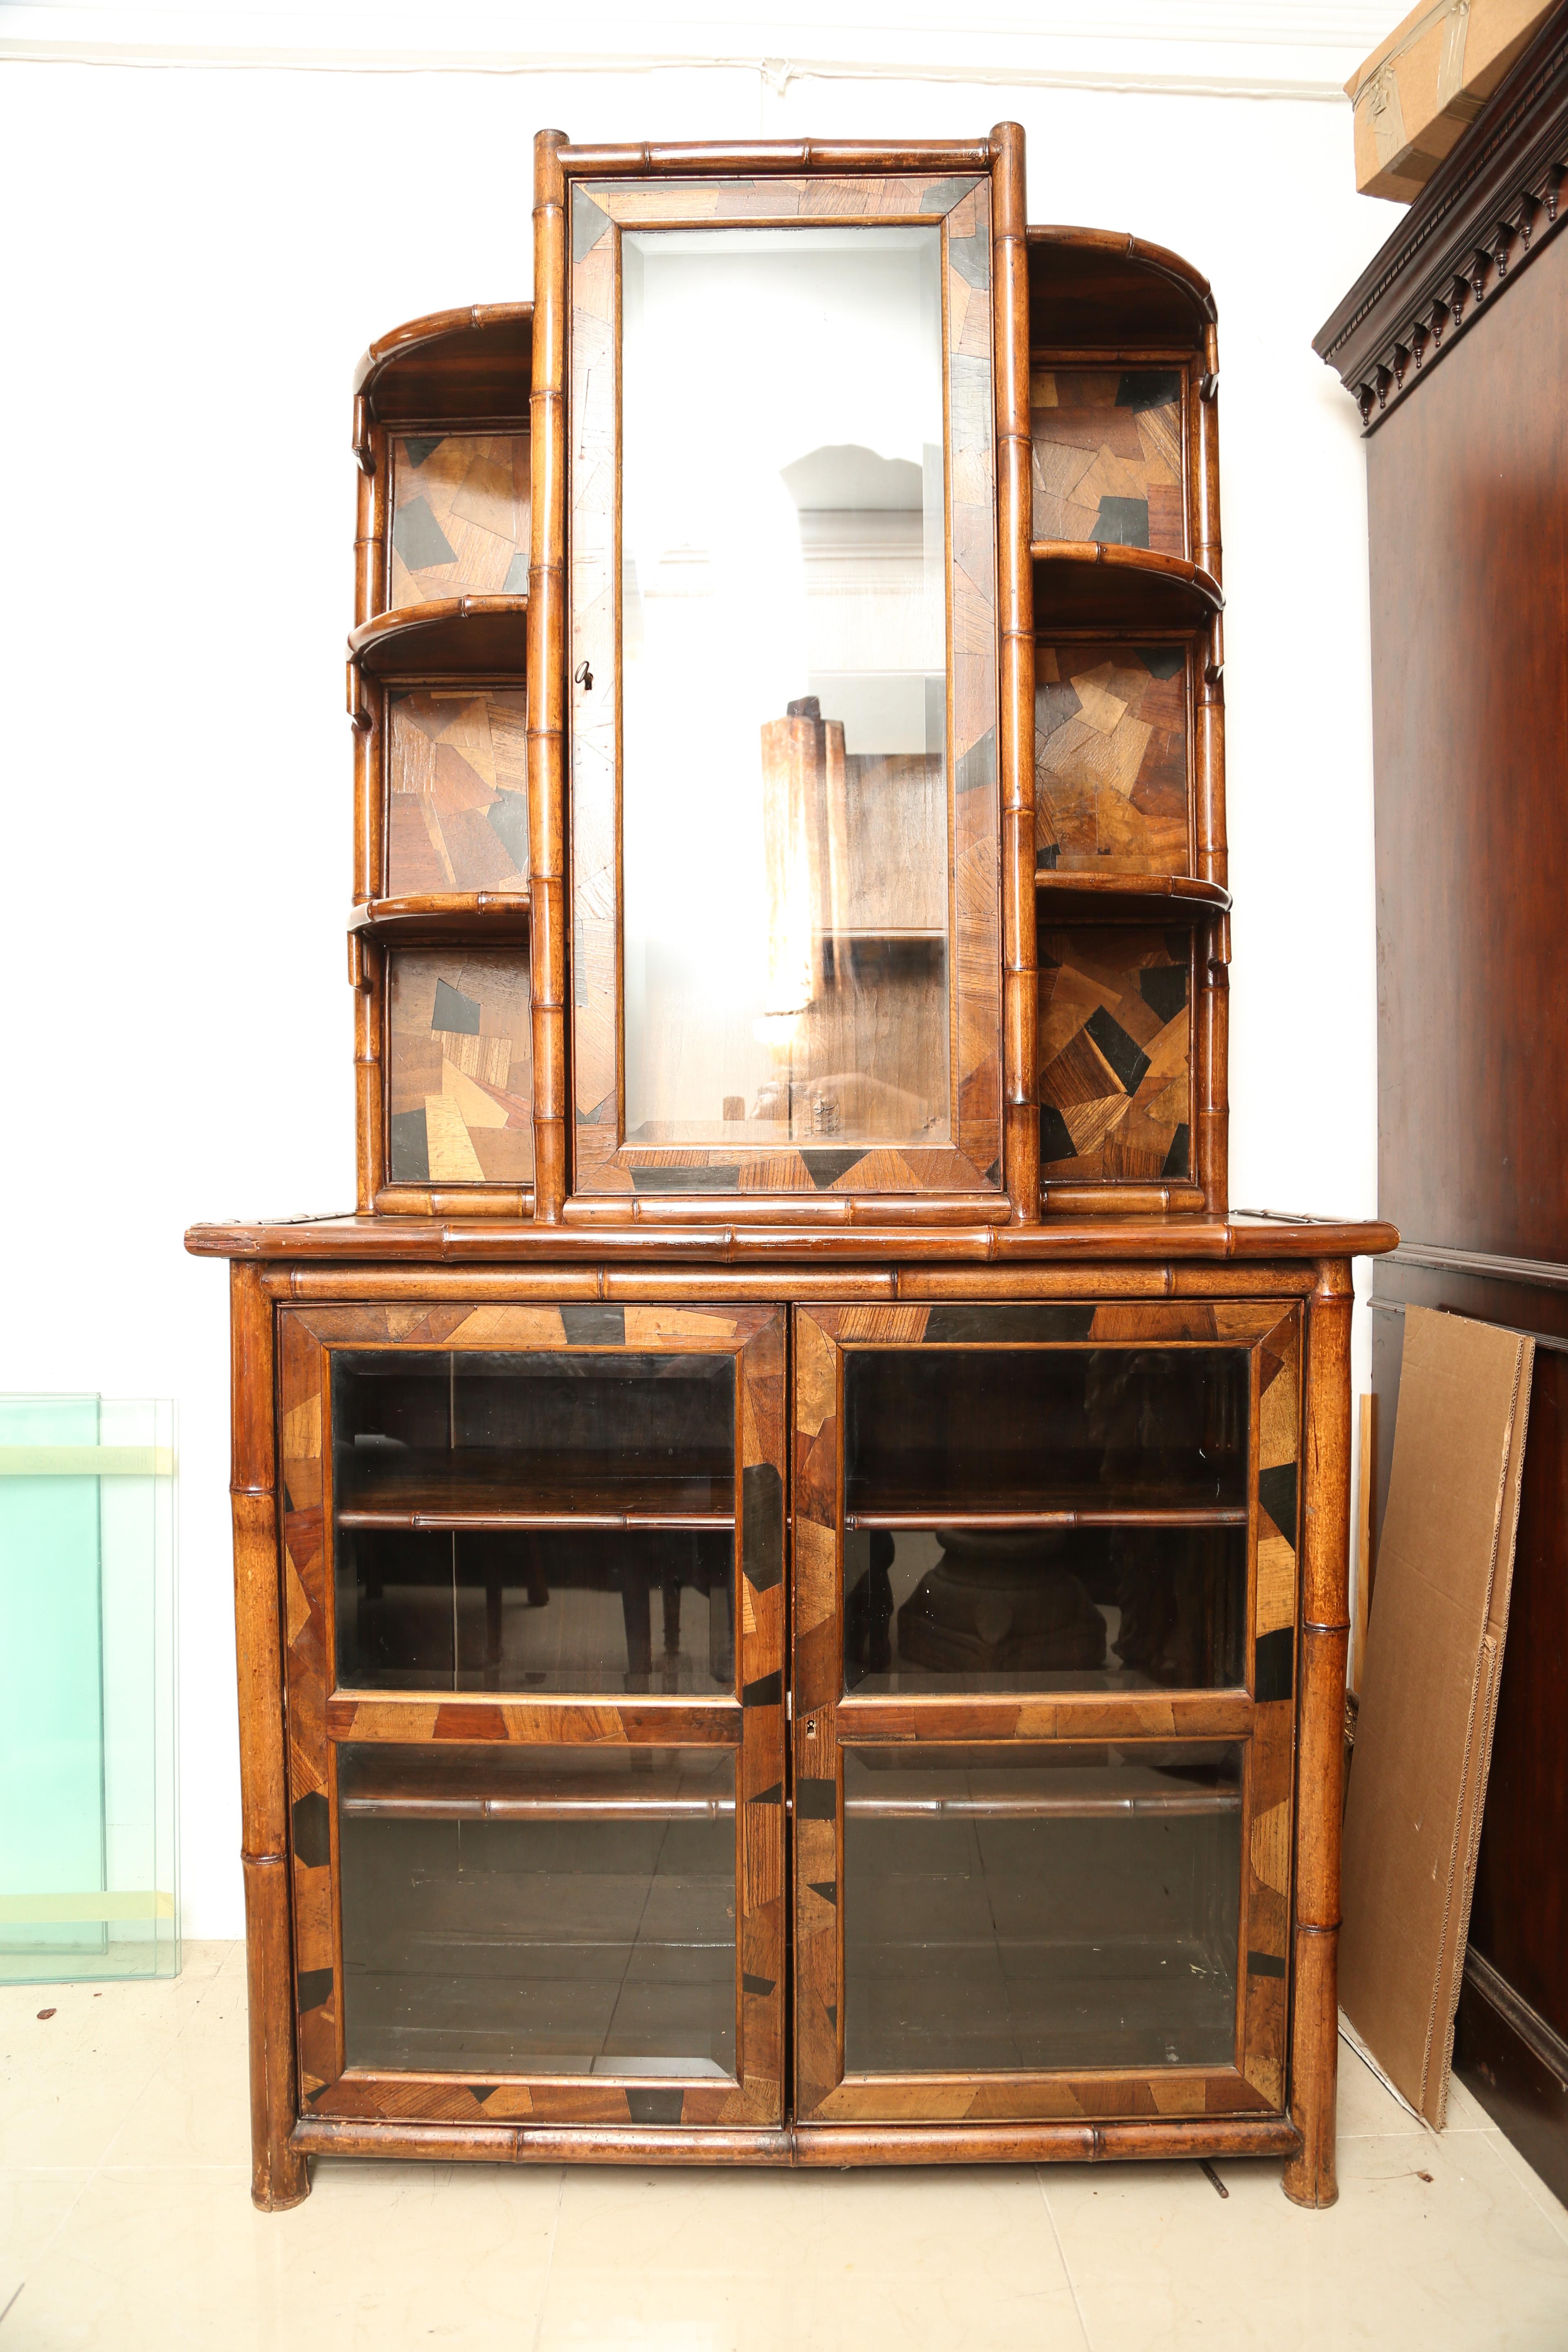 This is a superb quality original antique bamboo bookcase with 2 doors below and one above.
In the arts and crafts style.
There are many pieces of wood ranging from ebony, oak, pollard oak, mahogany, beach etc all individual inserted.
There are 2